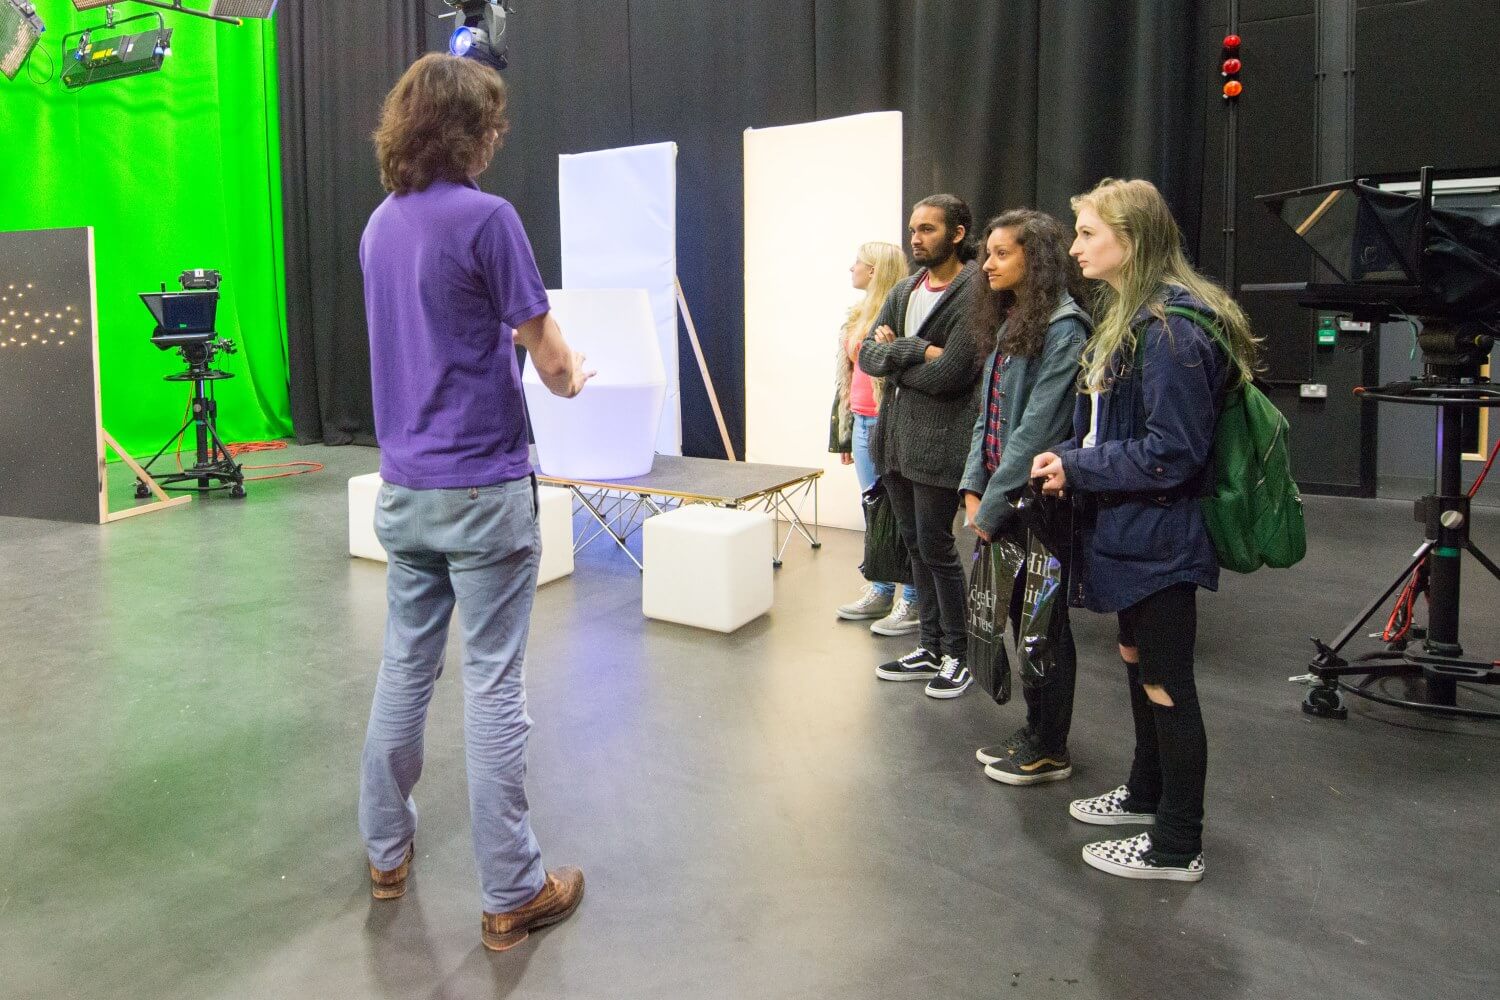 Prospective students receive a tour of the TV studio in Creative Edge during an applicant visit day.